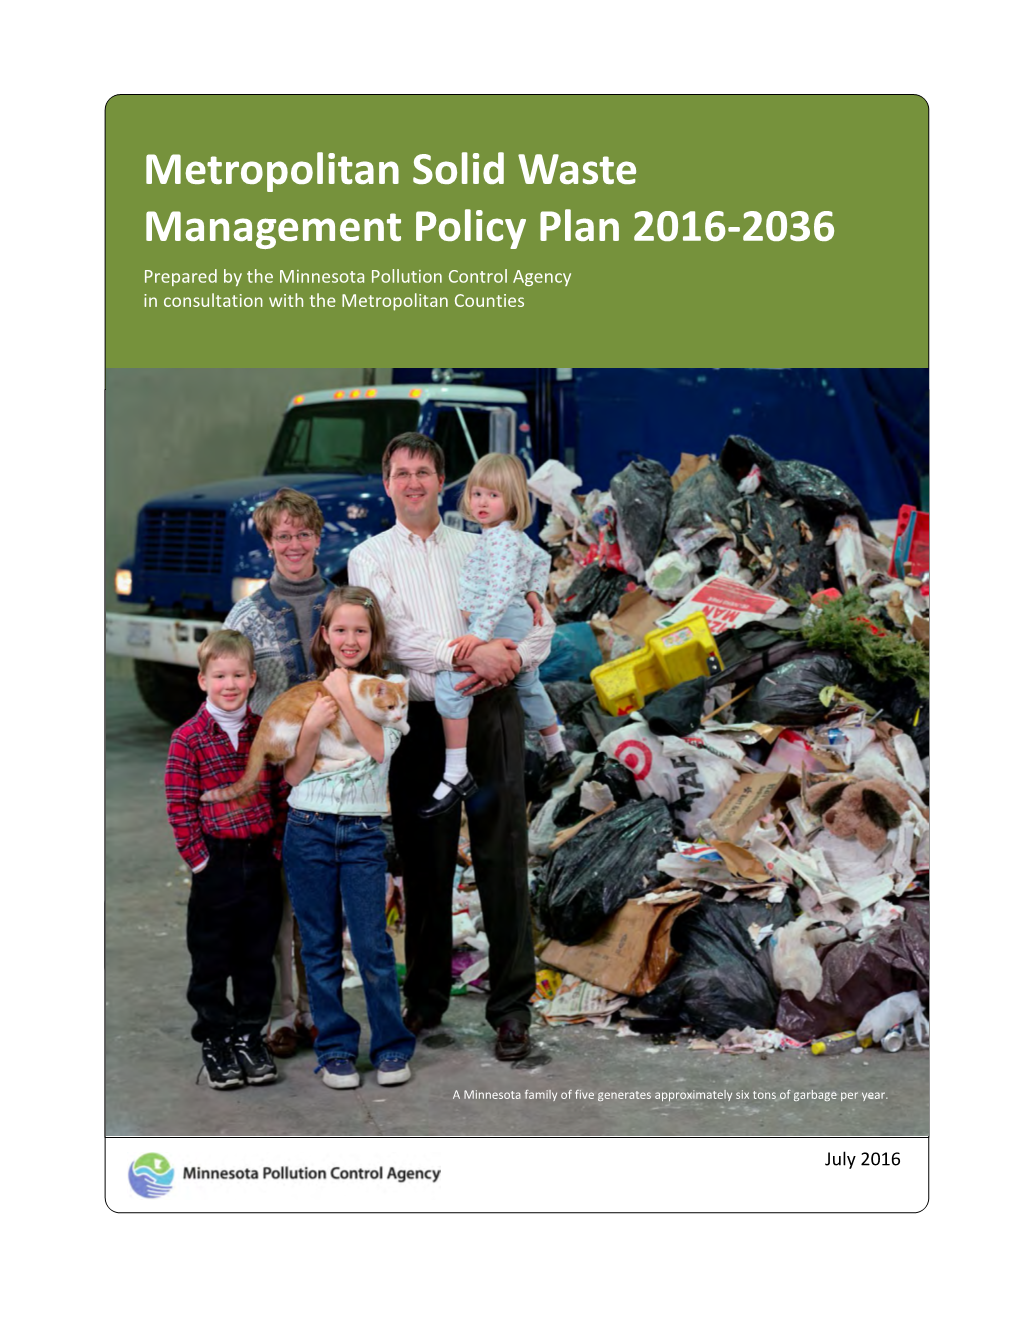 Metropolitan Solid Waste Management Policy Plan 2016-2036 Prepared by the Minnesota Pollution Control Agency in Consultation with the Metropolitan Counties